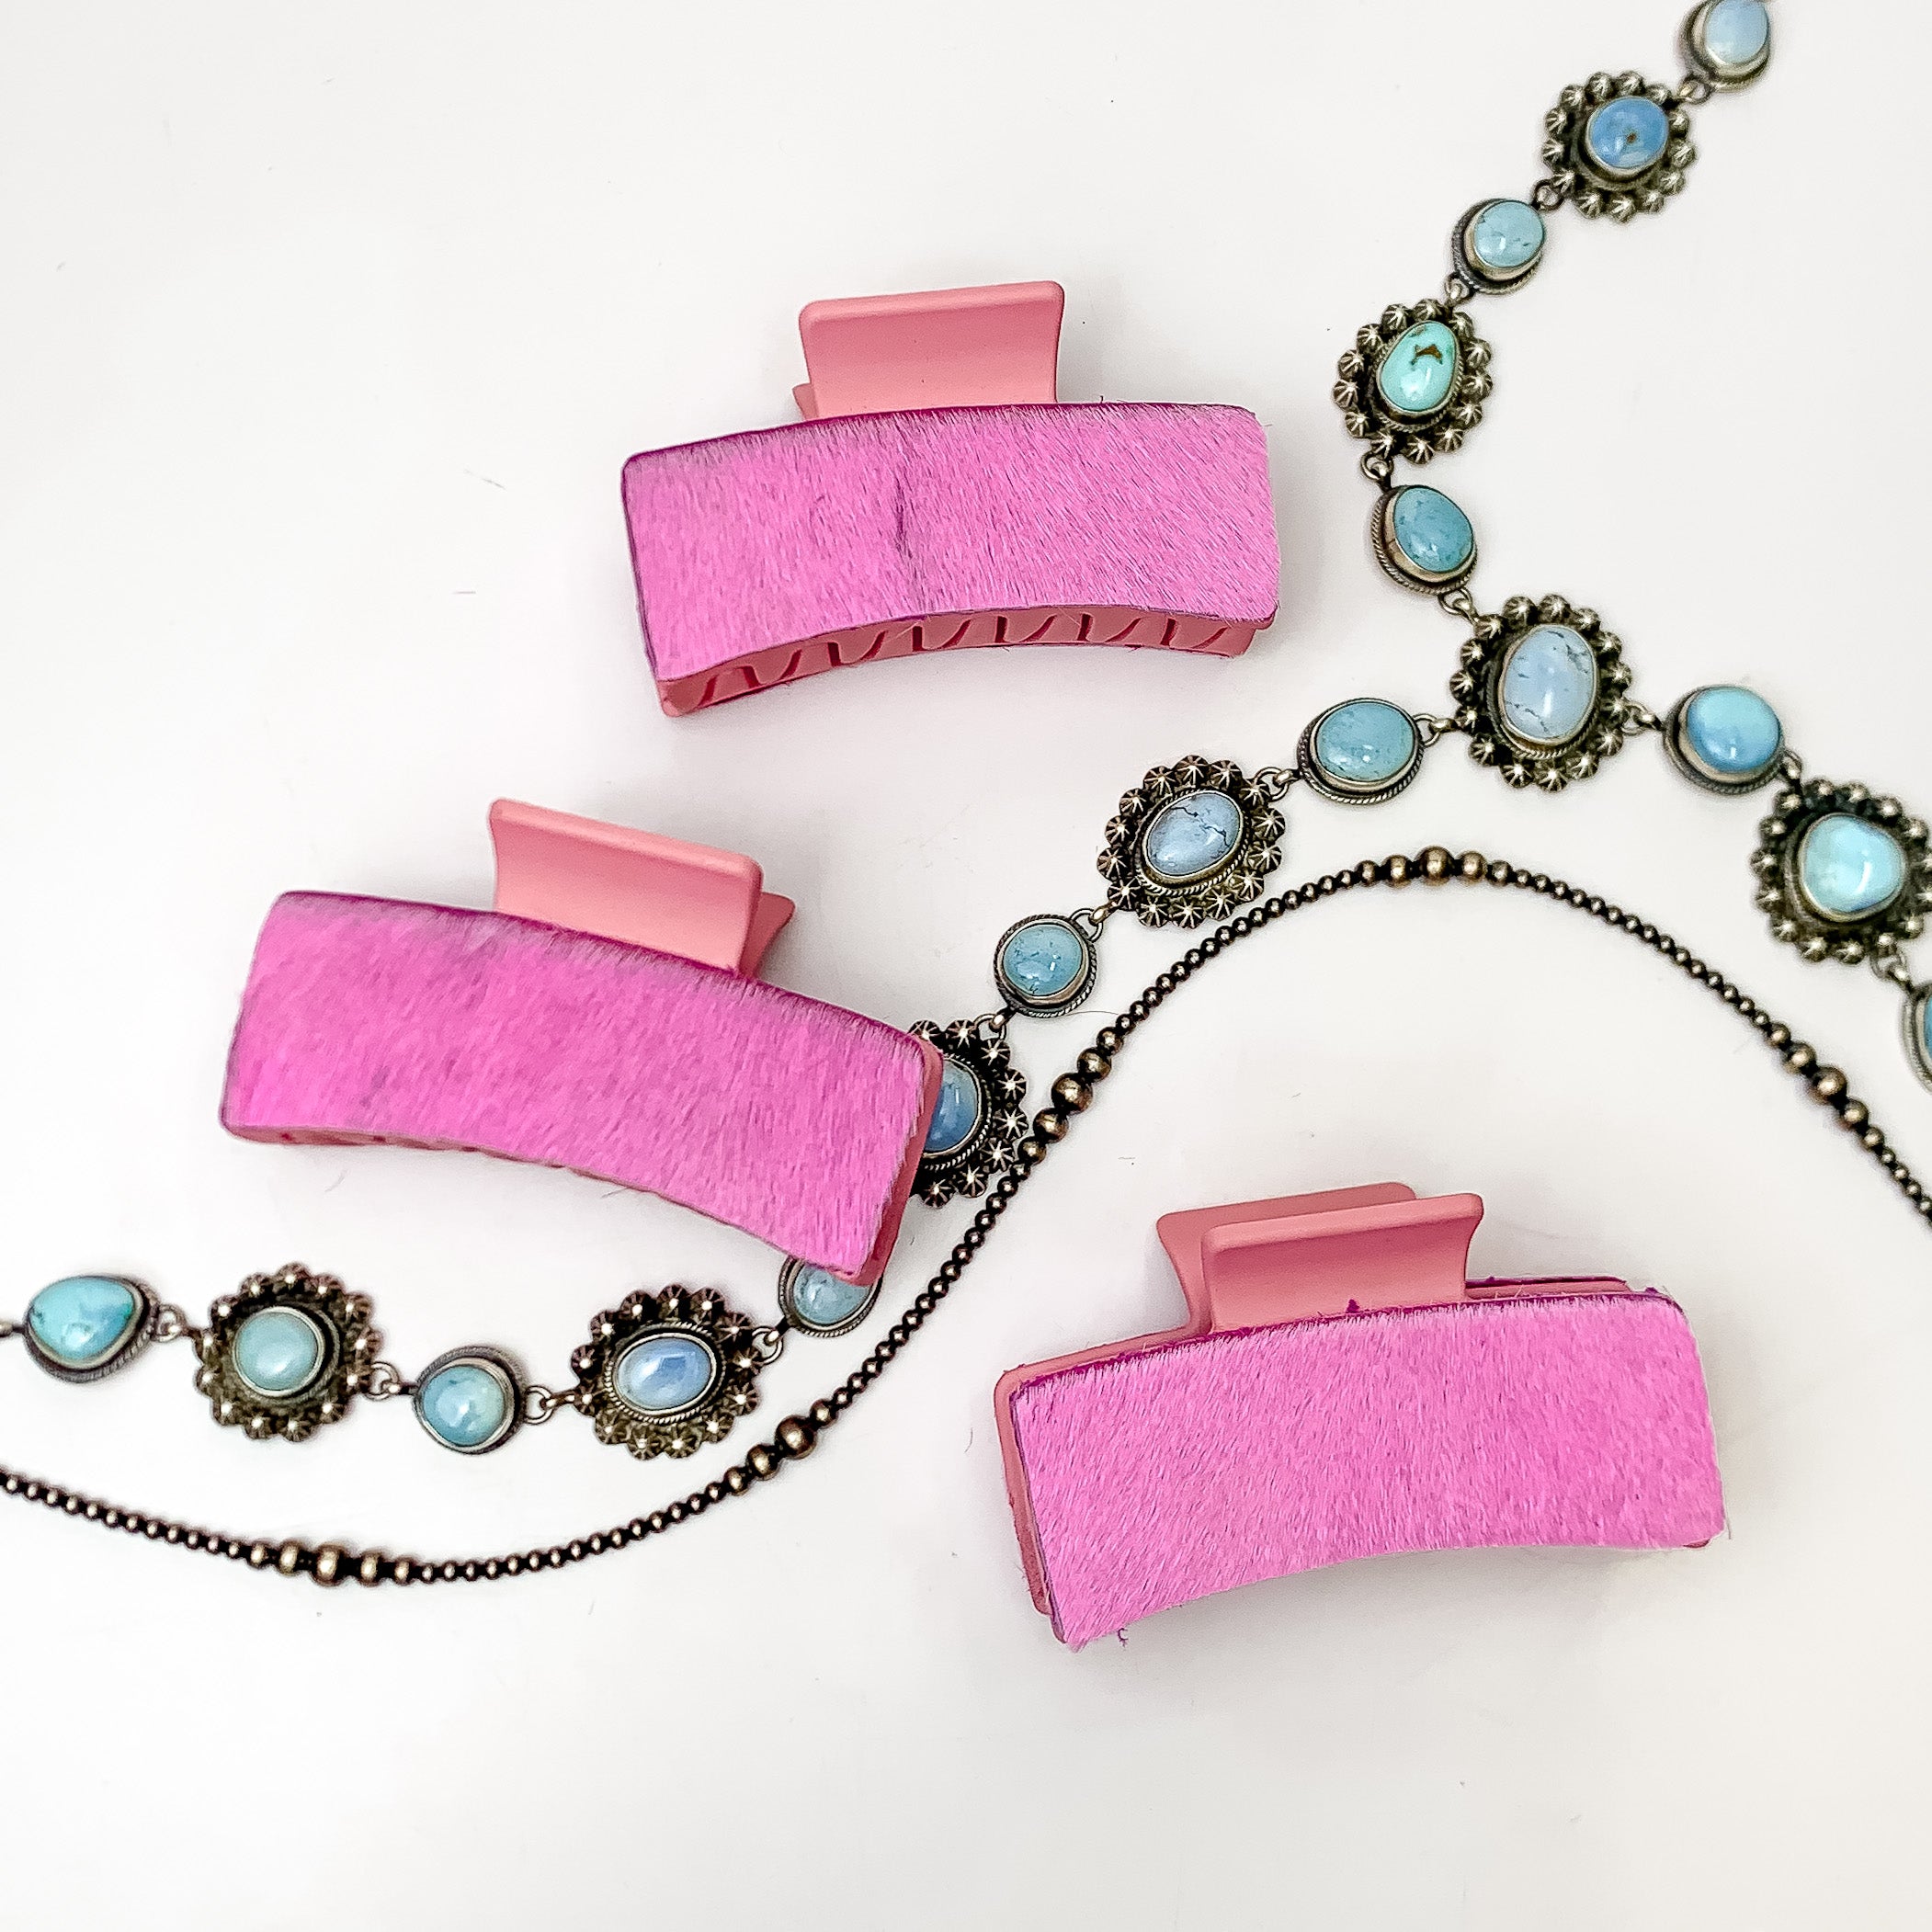 Pictured are three pink hair clips with light pink hide patches. These earrings are pictured on a white background with silver necklaces under the clips. 